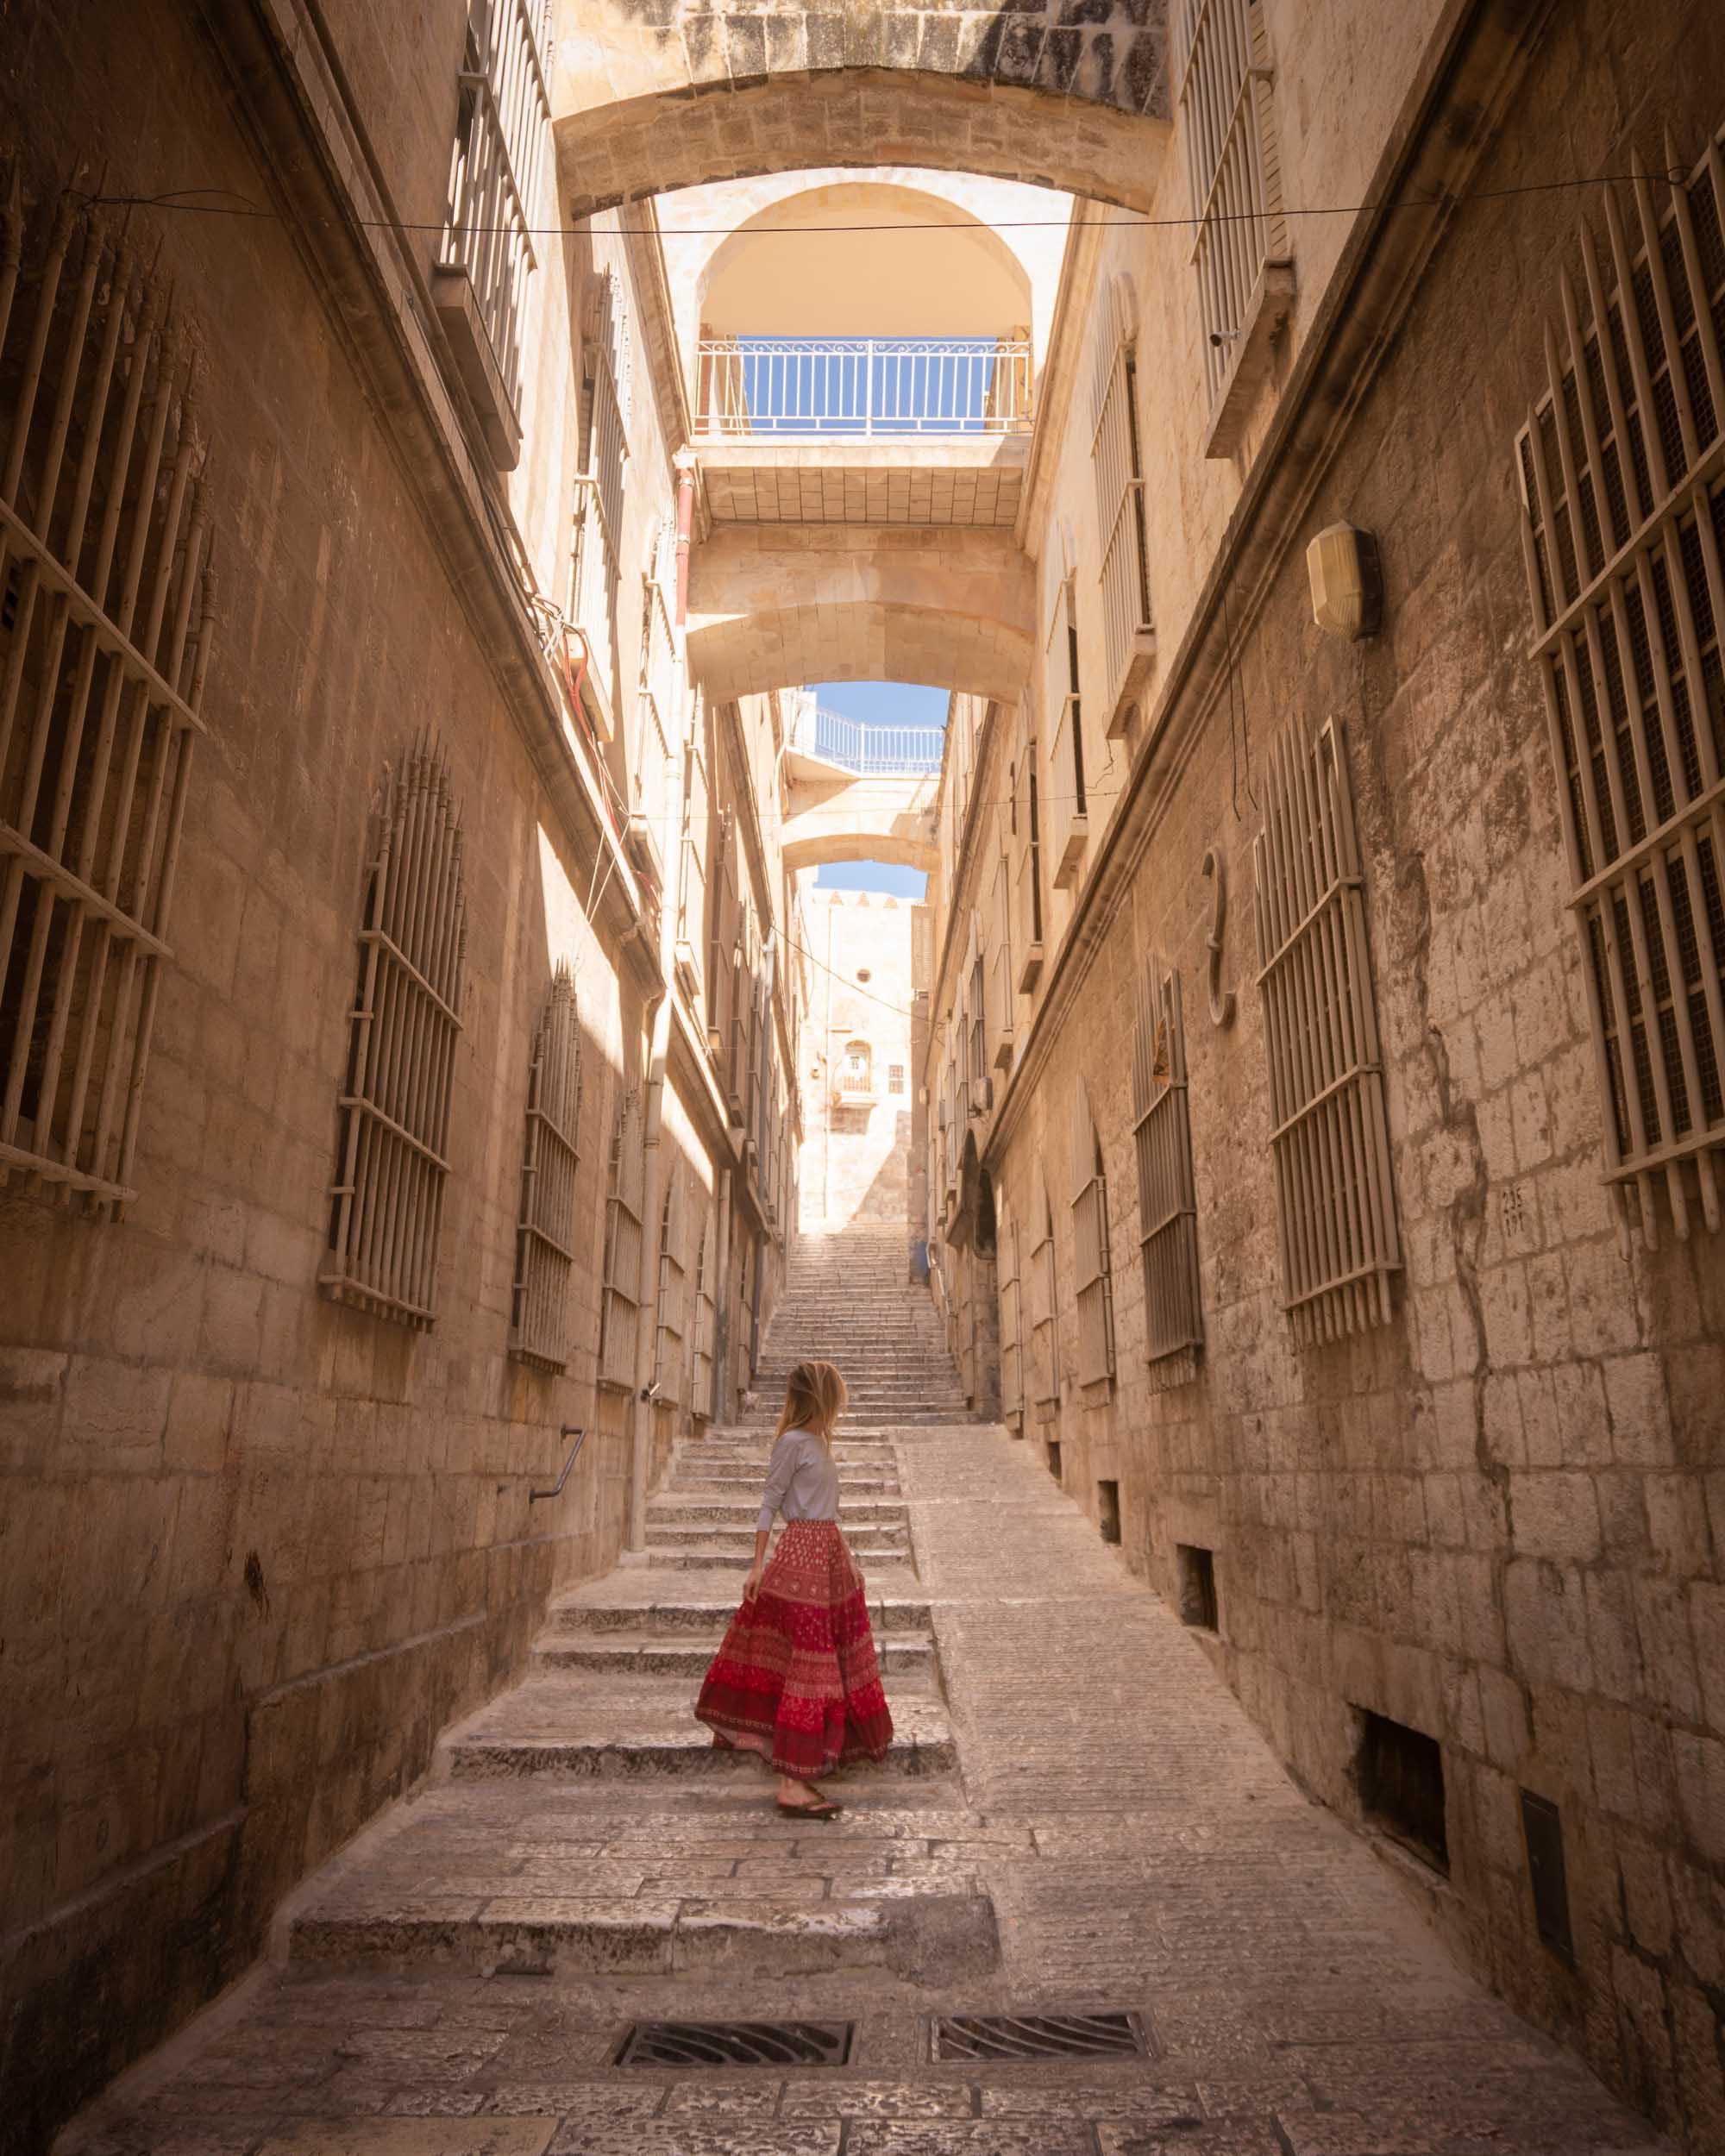 Photo taken on one of the allies off Lion's Gate Street in the Old City of Jerusalem.